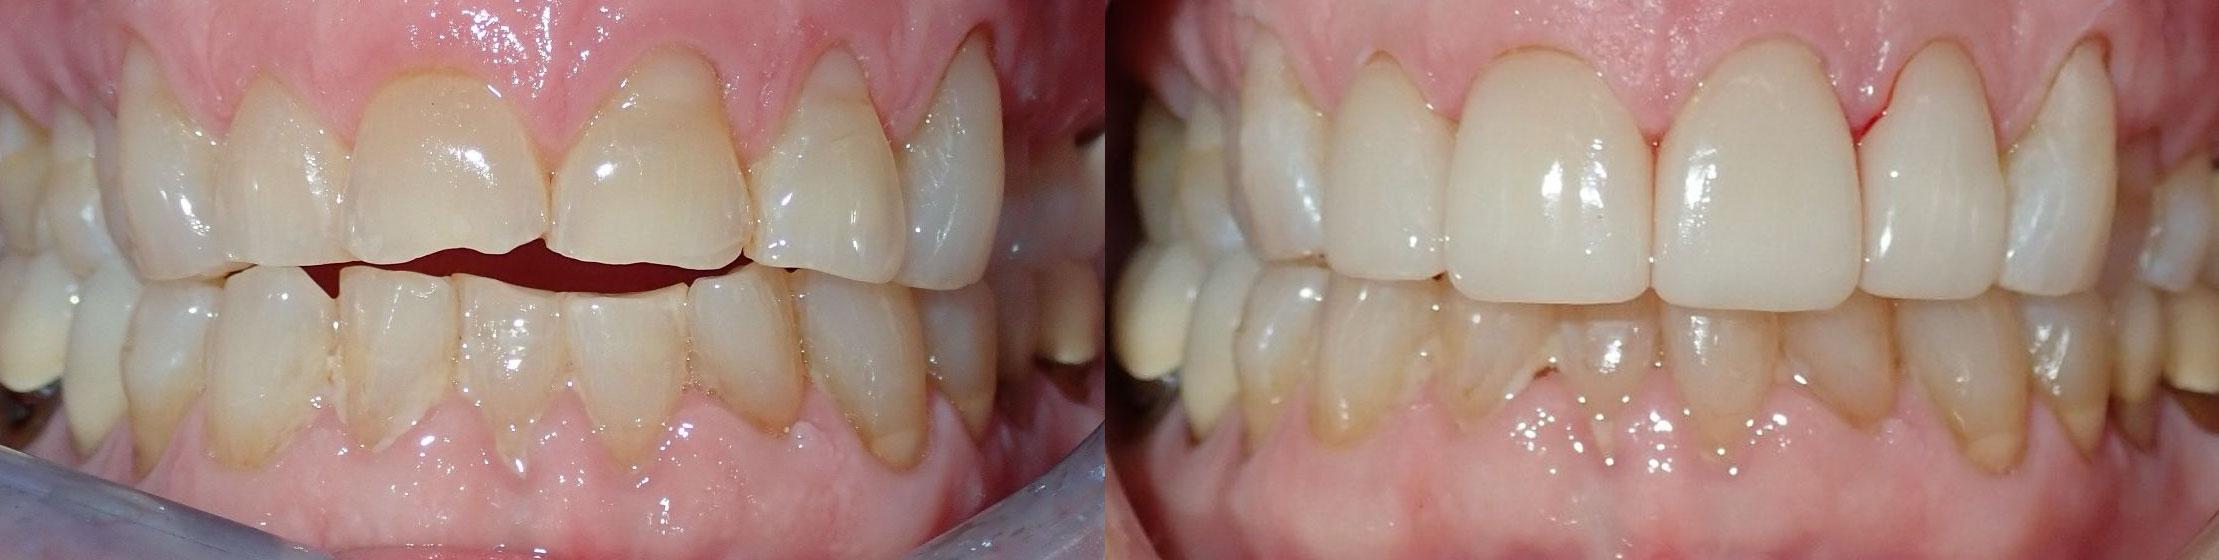 Cosmetic Crowns to repair damaged dentition